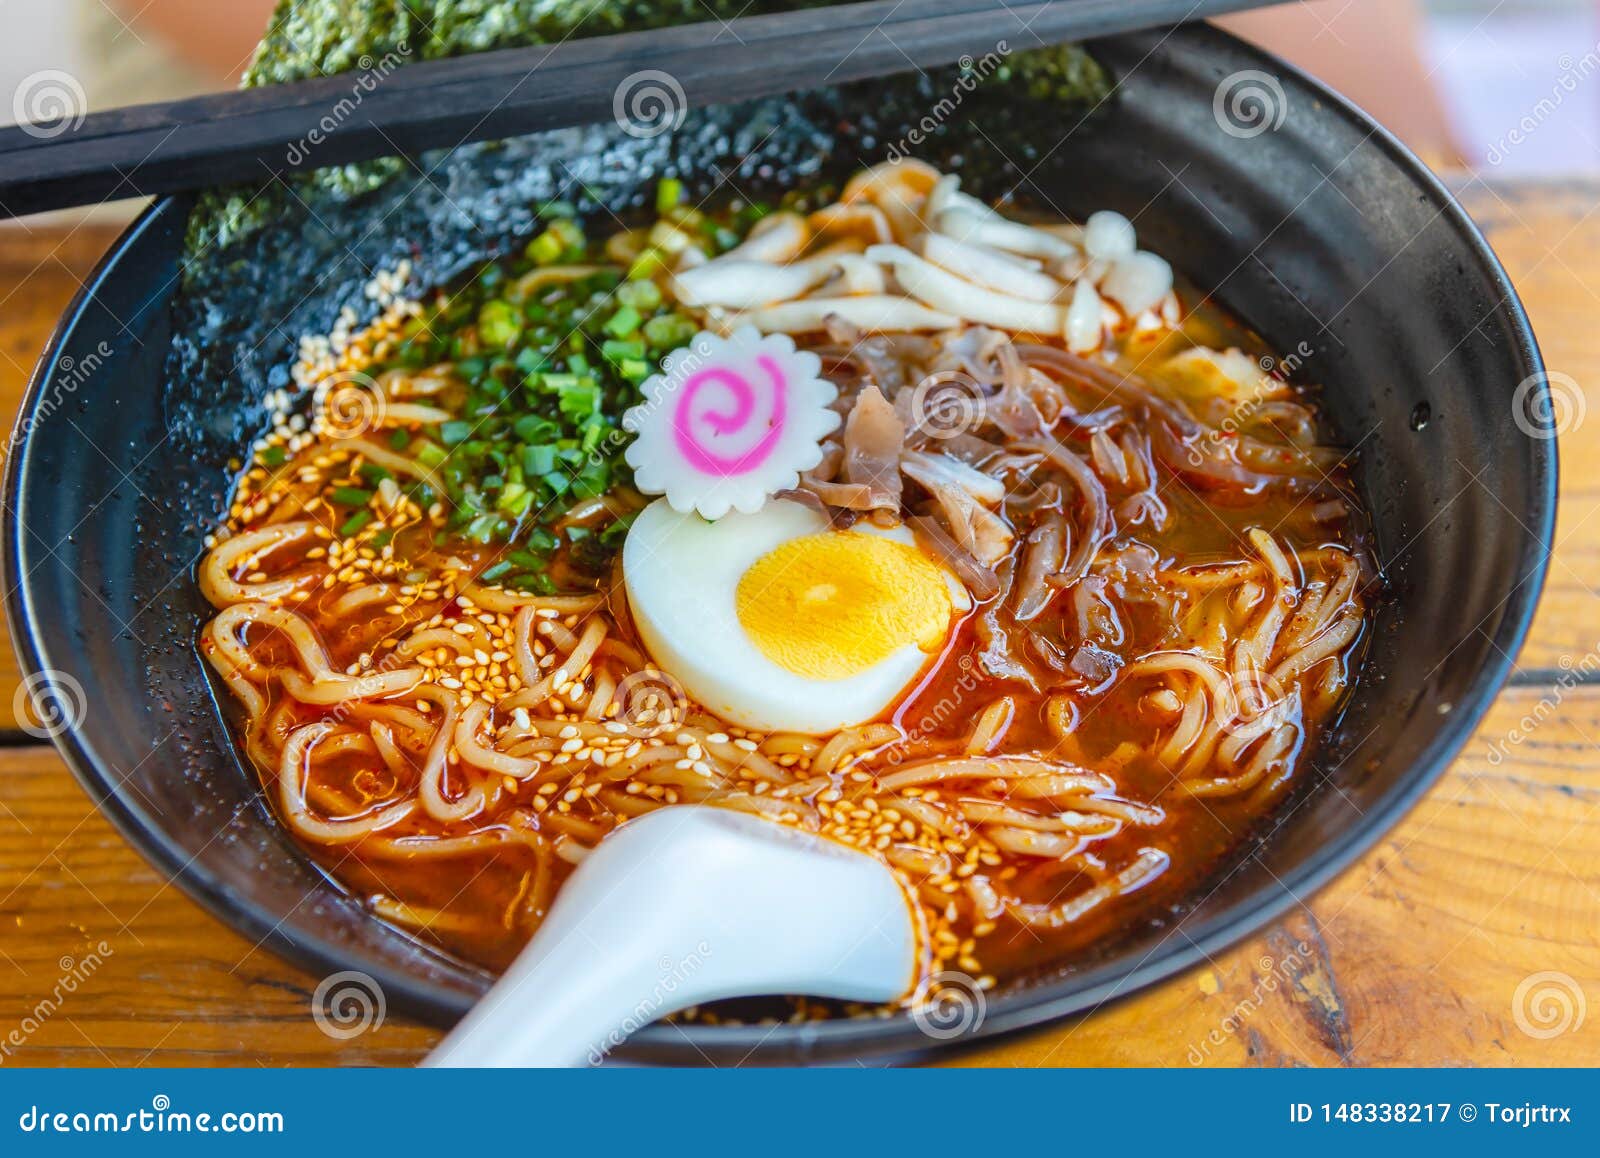 Spicy Japanese Ramen Noodle Soup With Egg Japanese Food Culture Stock Image Image Of Delicious Chinese 148338217